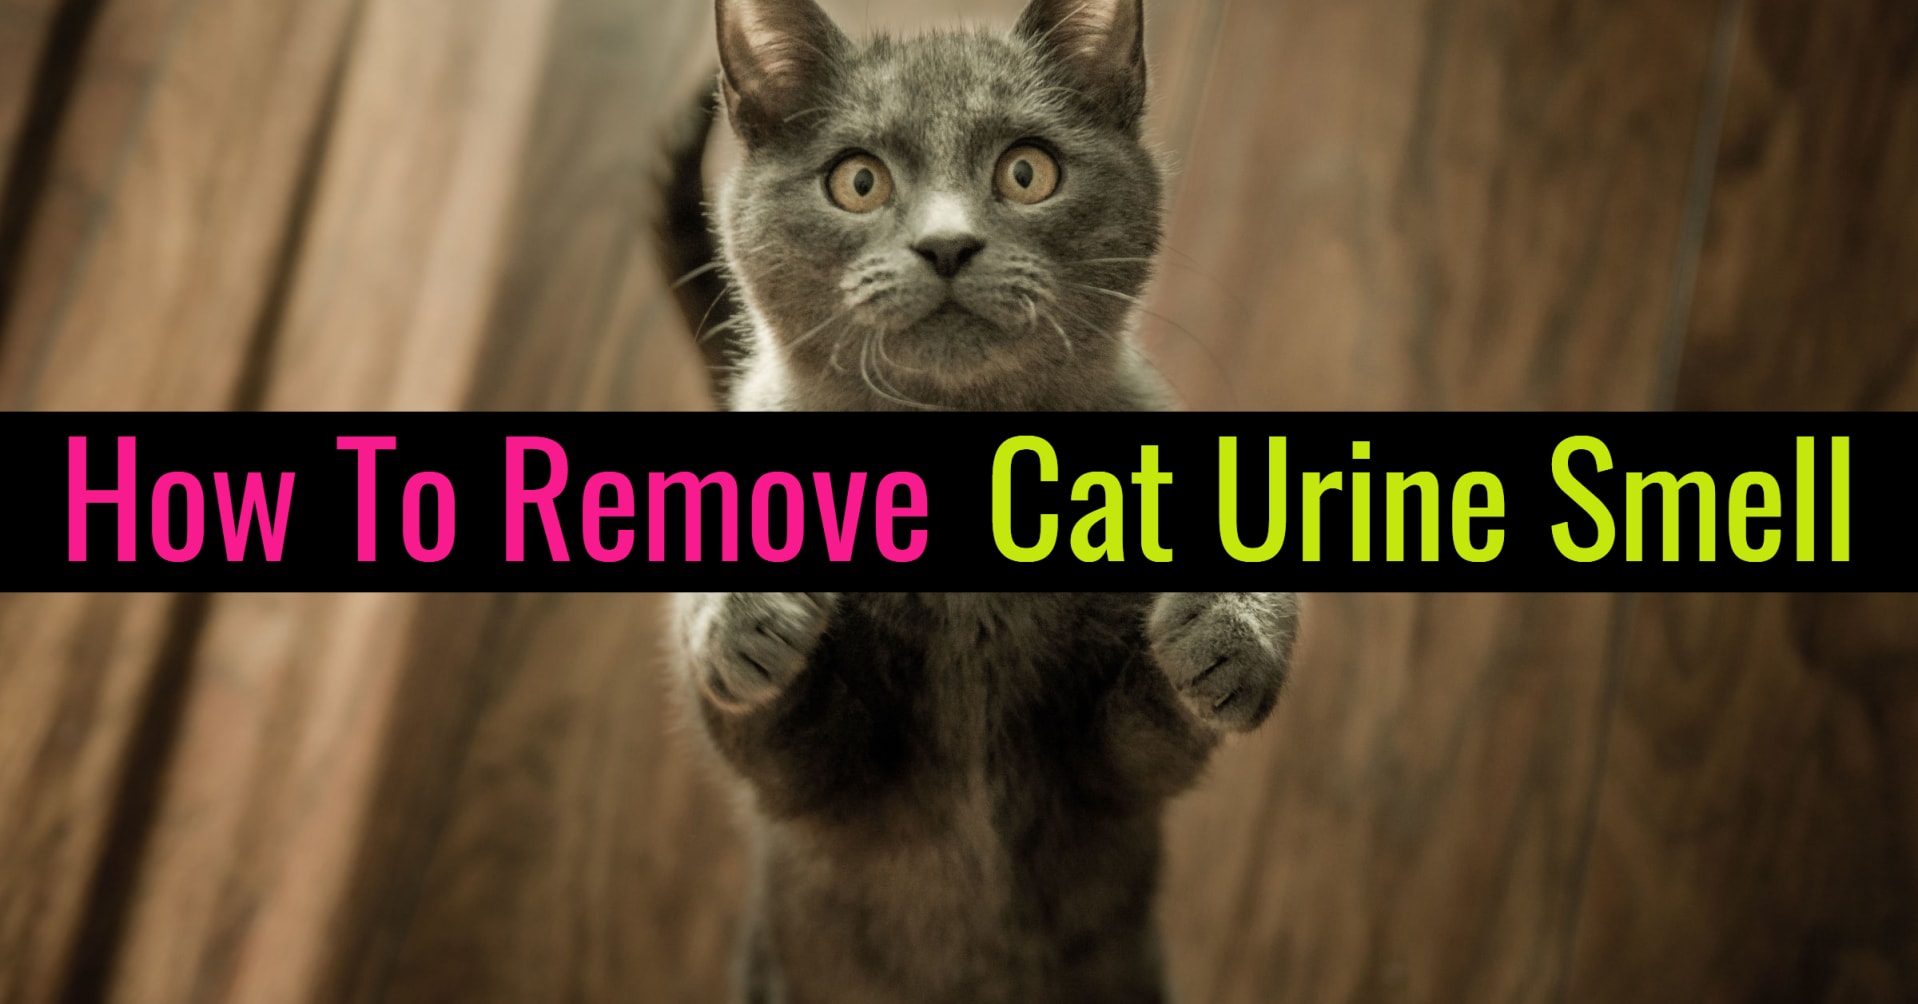 Cat Pee Smell Remover-DIY Enzyme Cleaner for Cat Urine - how to remove cat urine pee smell